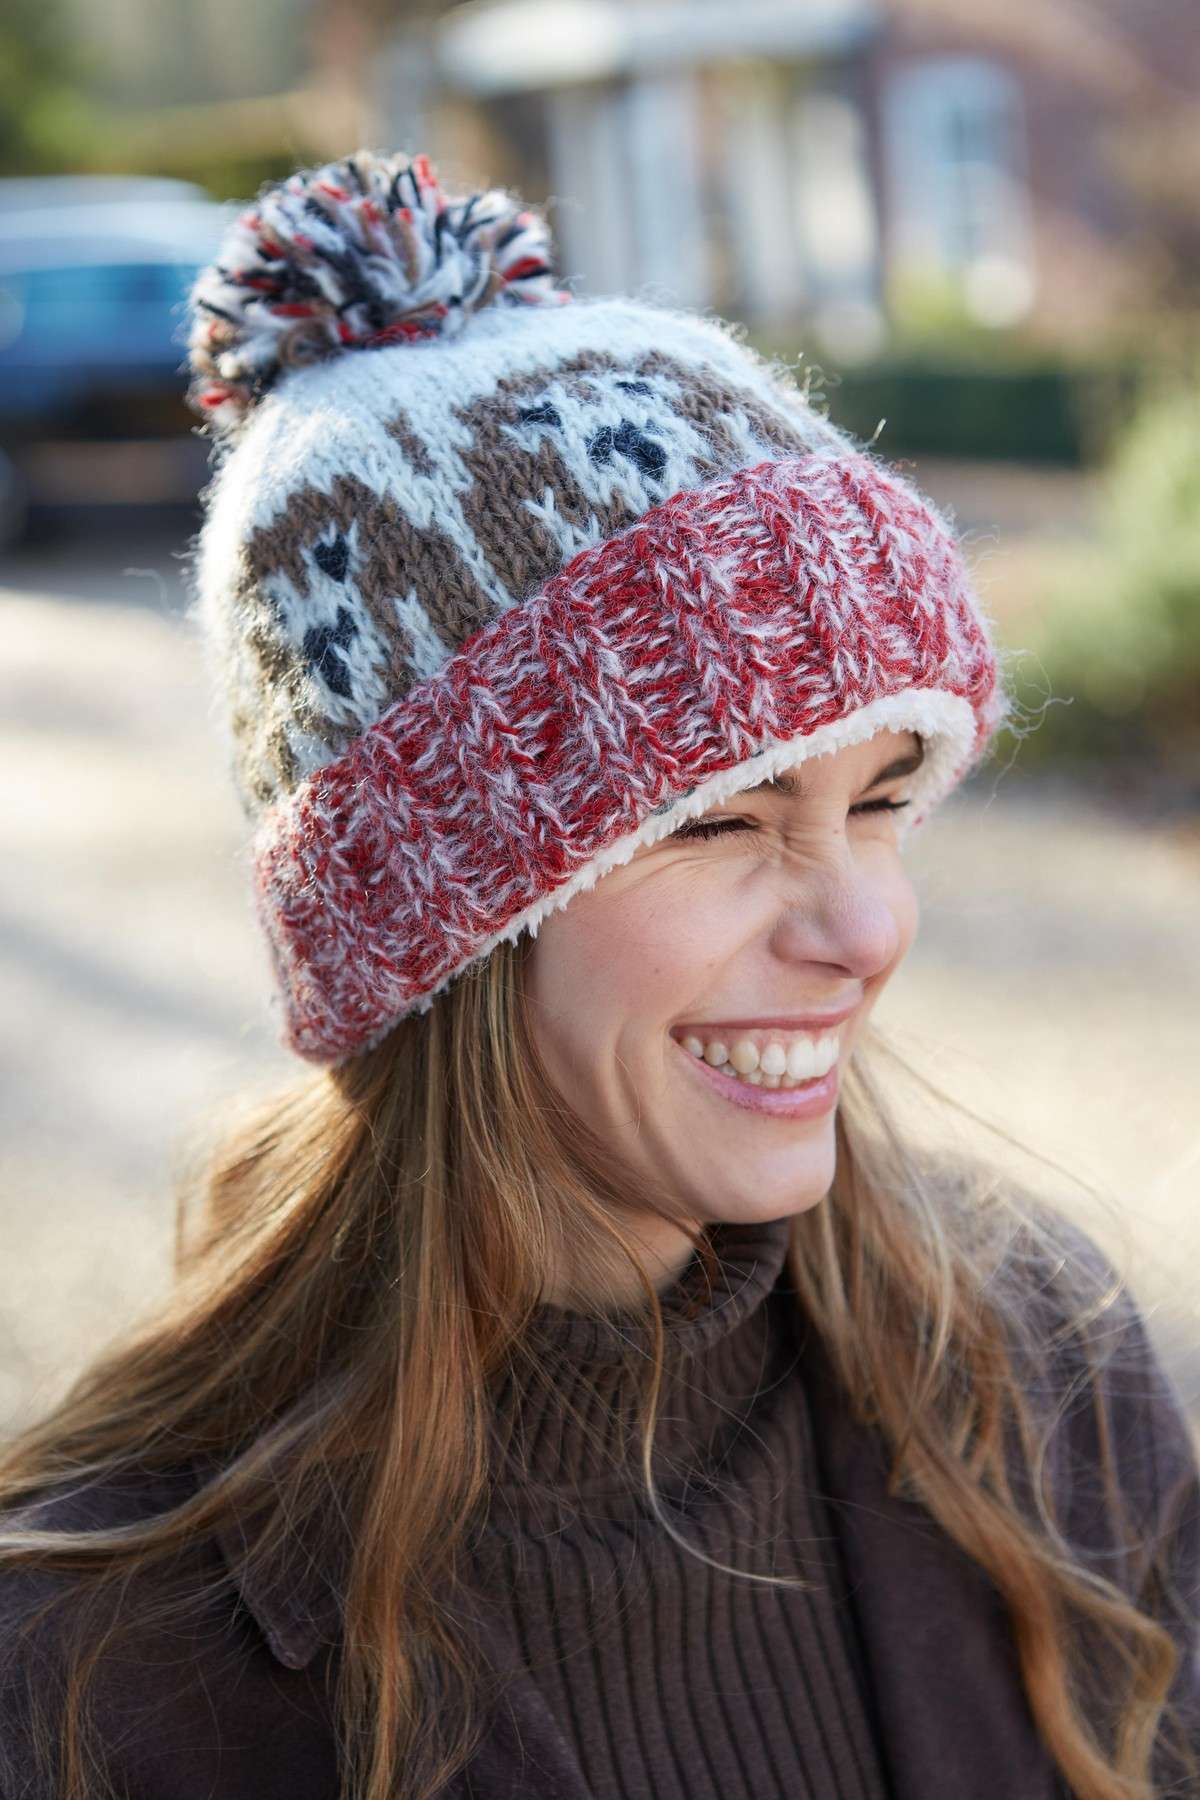 hound bobble red 2 <p style="text-align: center"><strong><span style="font-size: 18pt">Hazy Hound Bobble Hat, Hand Knitted</span></strong></p> <p style="text-align: center"><span style="font-size: 14pt">Our newest Hazy mohair blend Bobble hat. Perfect for those long dog walks.</span></p> <p style="text-align: center"><span style="font-size: 14pt"> Sherpa fleece lined for extra comfiness!</span> <span style="font-size: 14pt">Women's hand knitted wool mohair blend  bobble hat, with hound dog patterns.</span></p> <p style="text-align: center"><span style="font-size: 14pt">Red, Brown, Oatmeal colours.</span></p> <p style="text-align: center"><span style="font-size: 14pt">Wool/Mohair blend</span> <span style="font-size: 14pt">Hand knitted</span> <span style="font-size: 14pt">Colours and patterns may vary slightly due to the handmade nature of this product. </span></p> <div class="row"> <div id="item_price" class="col-sm-12"> <p style="text-align: center"><span style="font-size: 14pt">No two items are exactly the same!</span></p> <p style="text-align: center"><span style="font-size: 14pt">Handwarmers and headband available in this pattern.</span></p> <p style="text-align: center"><span style="font-size: 14pt">All colours are represented as closely as possible, we cannot guarantee 100% accuracy.</span></p> <h1 style="text-align: center"><strong>FREE P&P</strong></h1> </div> </div>